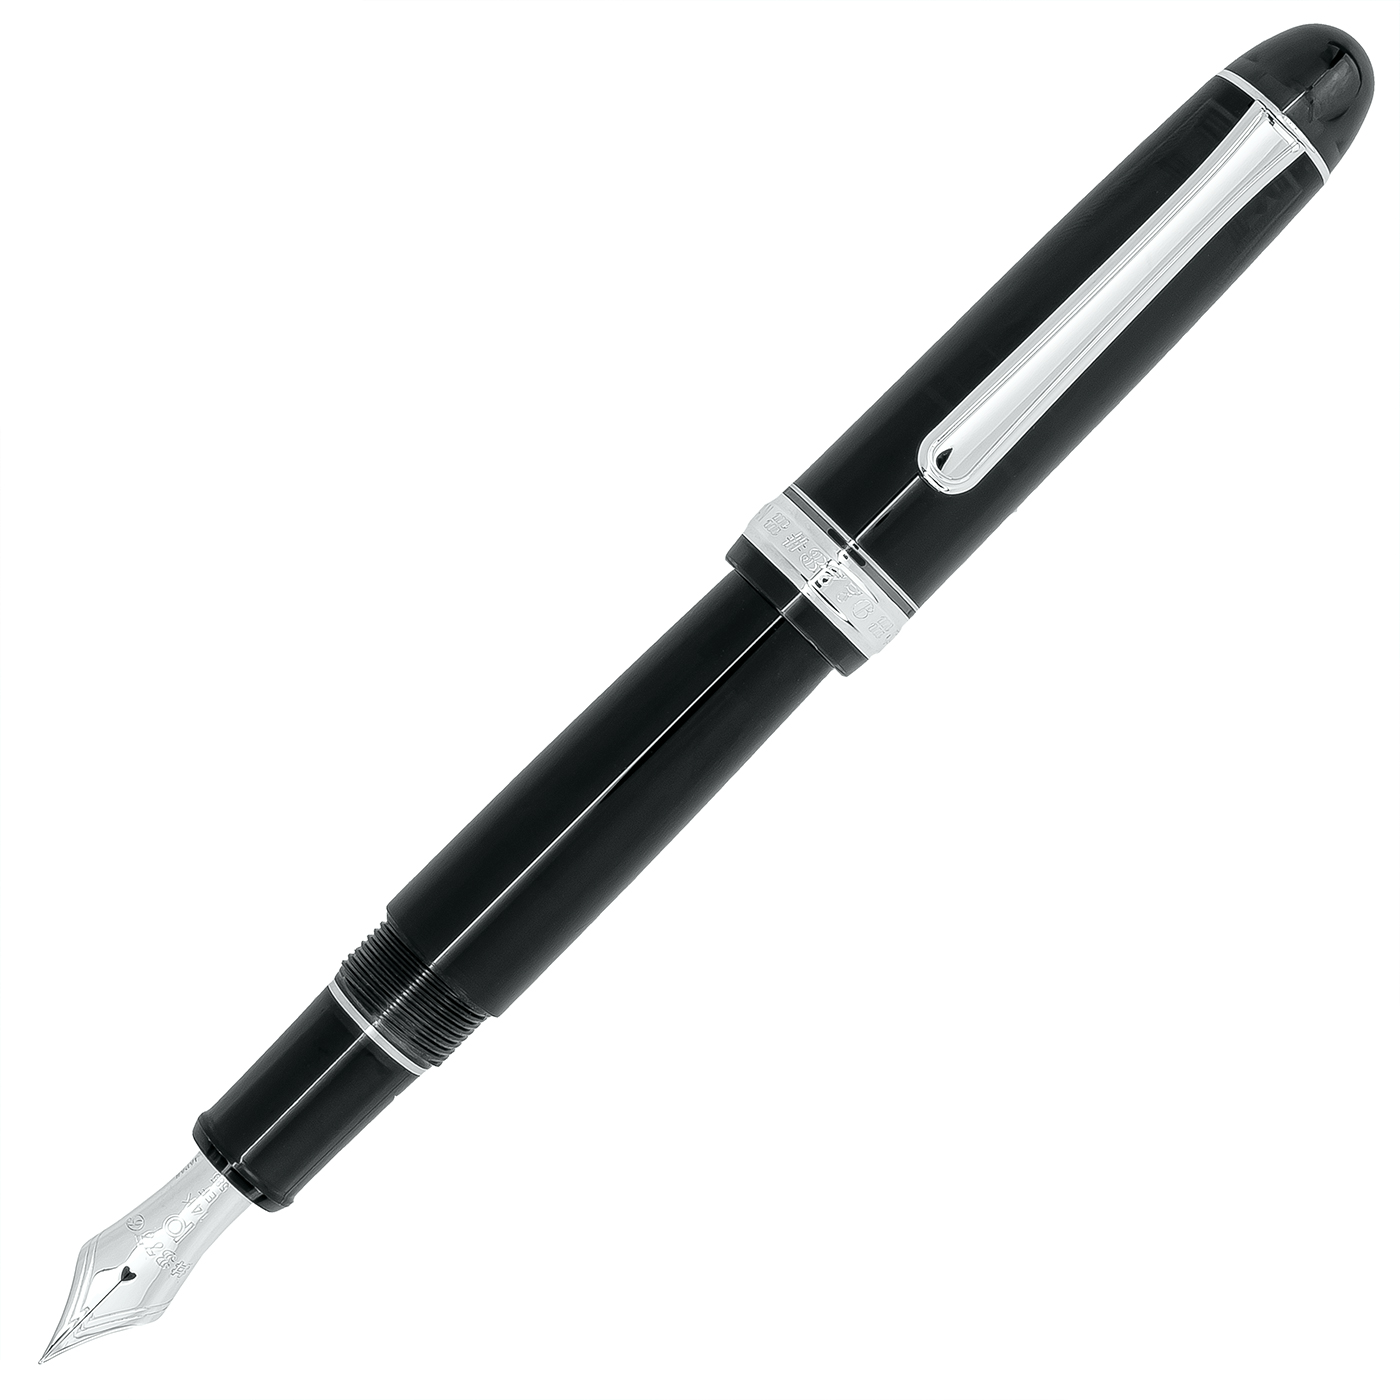 Platinum pens are made in Japan. These pens are for wordsmithing, hand lettering, writing, calligraphy, drawing, and art.